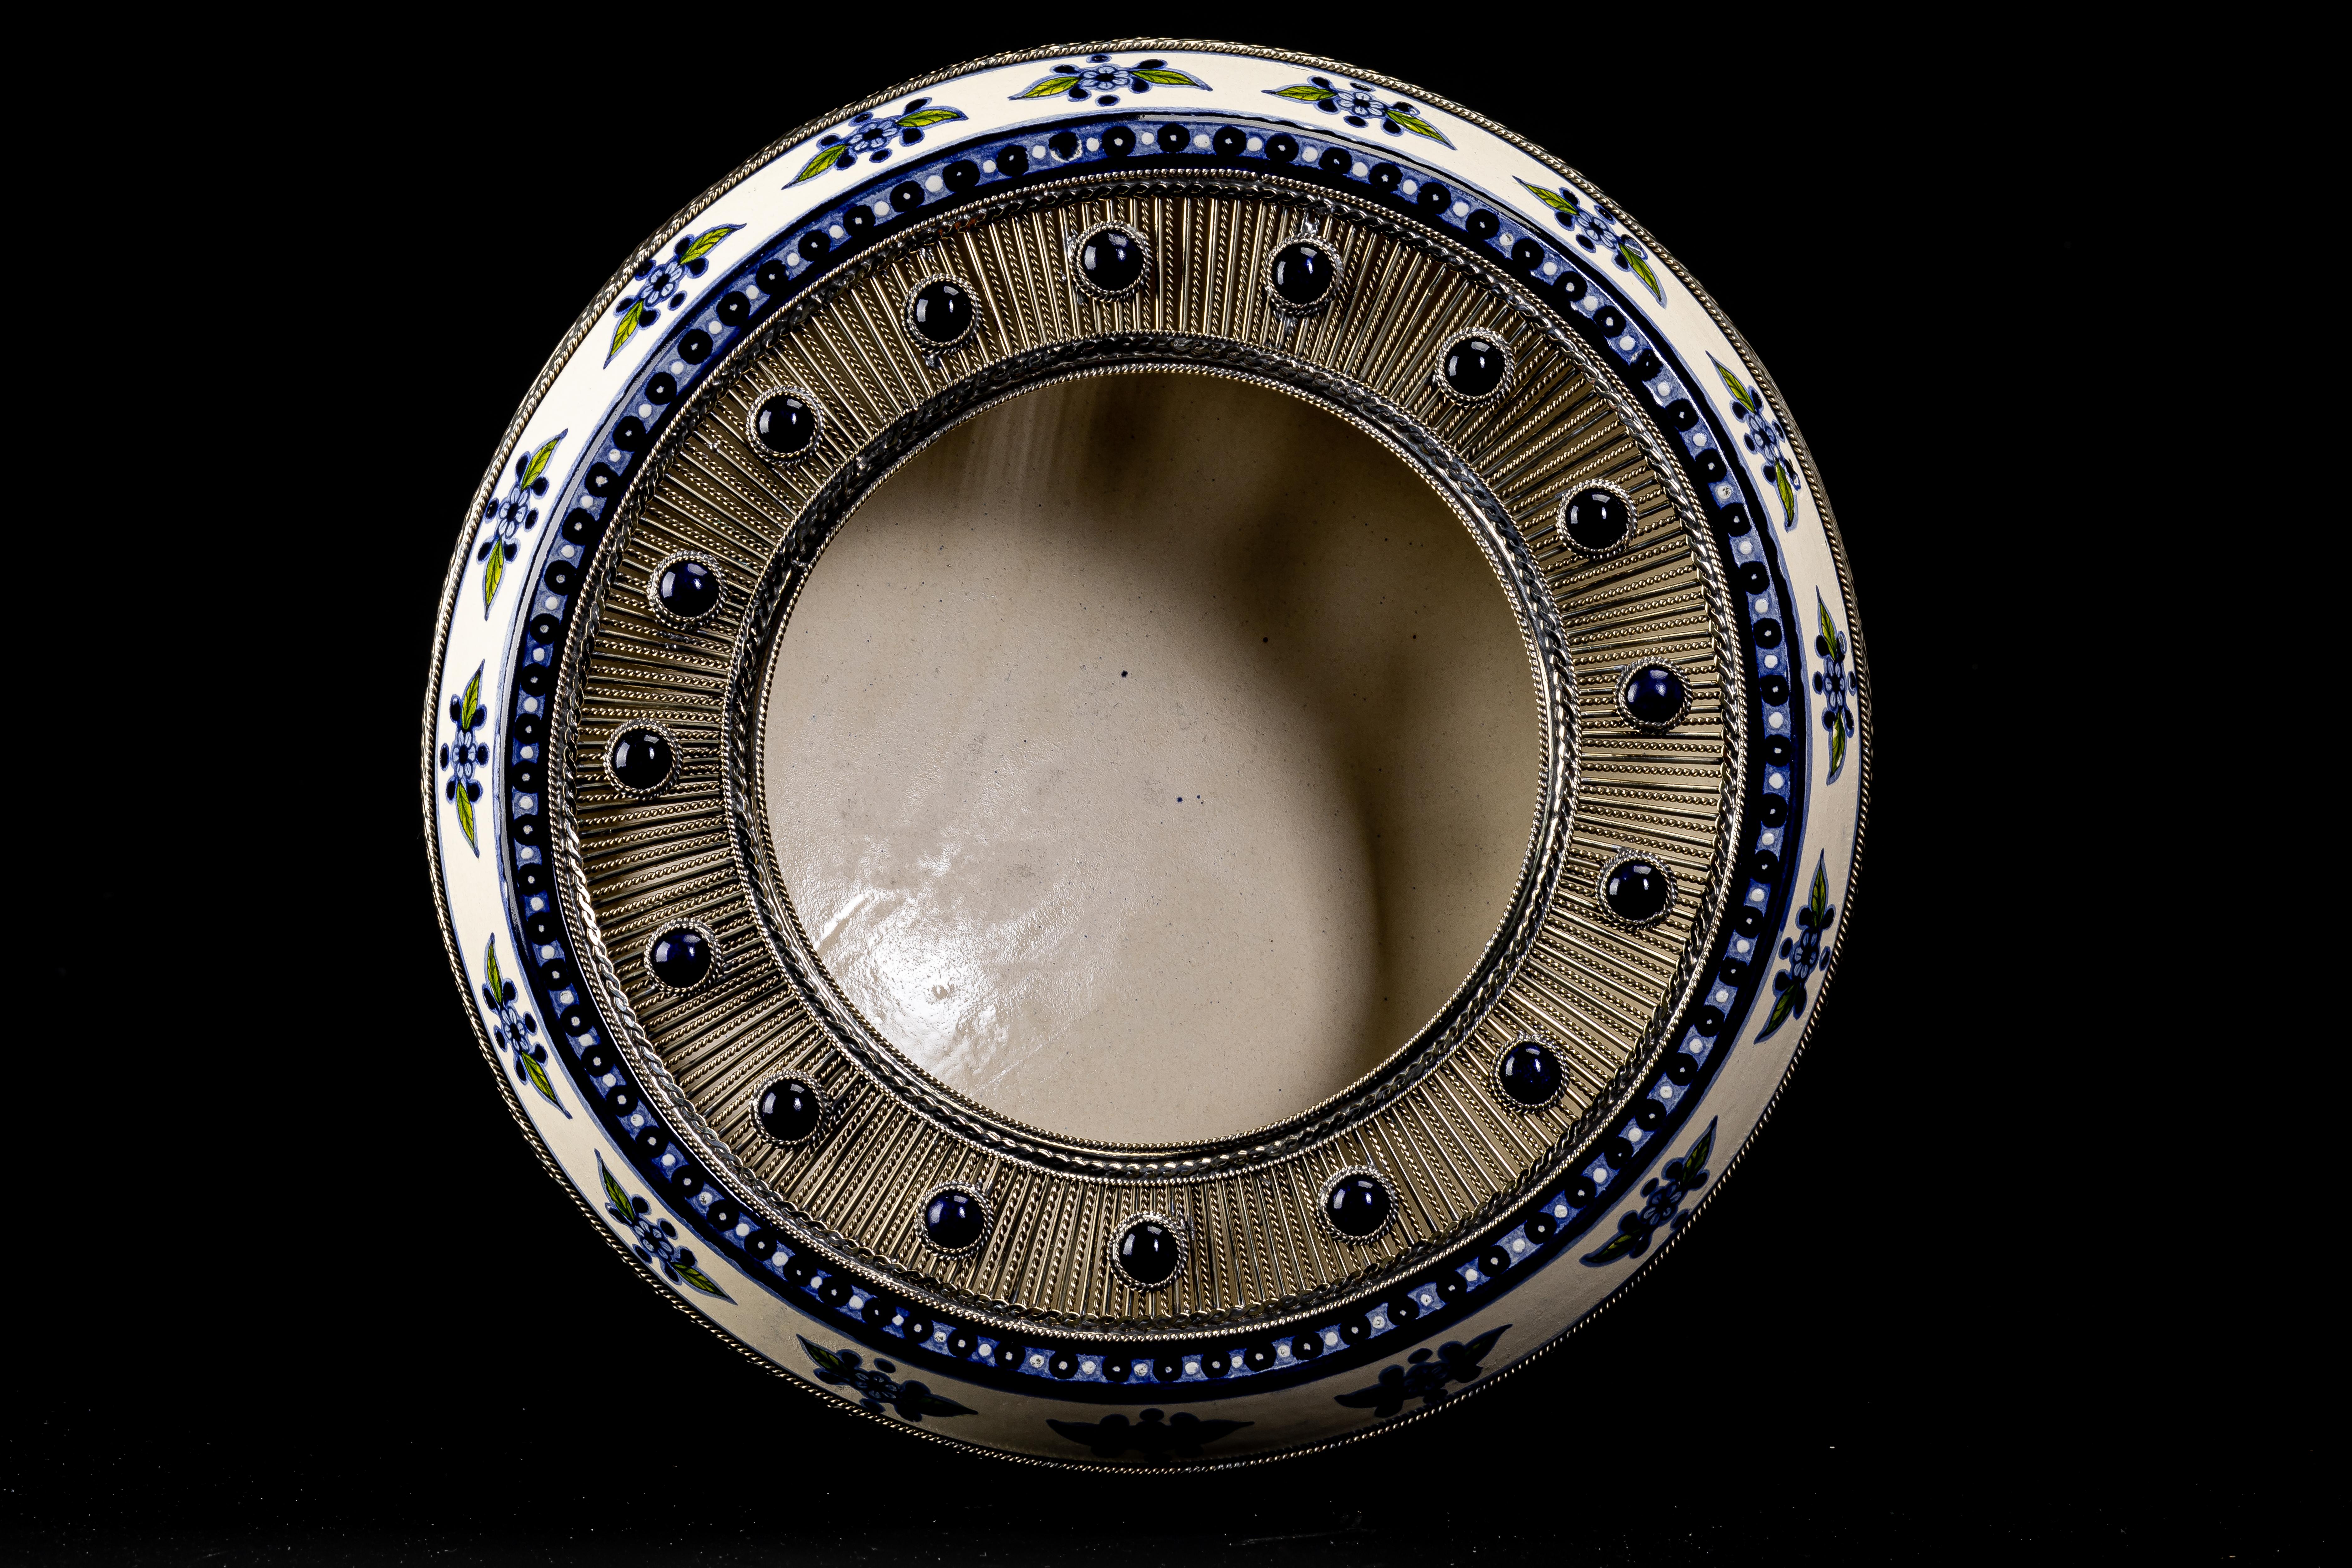 Always unique pieces are what you are going to hear about Jesus Guerrero Santo's work, all the pieces are handmade and created one by one it takes months to produce each peace. This ceramic and white metal (alpaca) bowl centerpiece, was created in